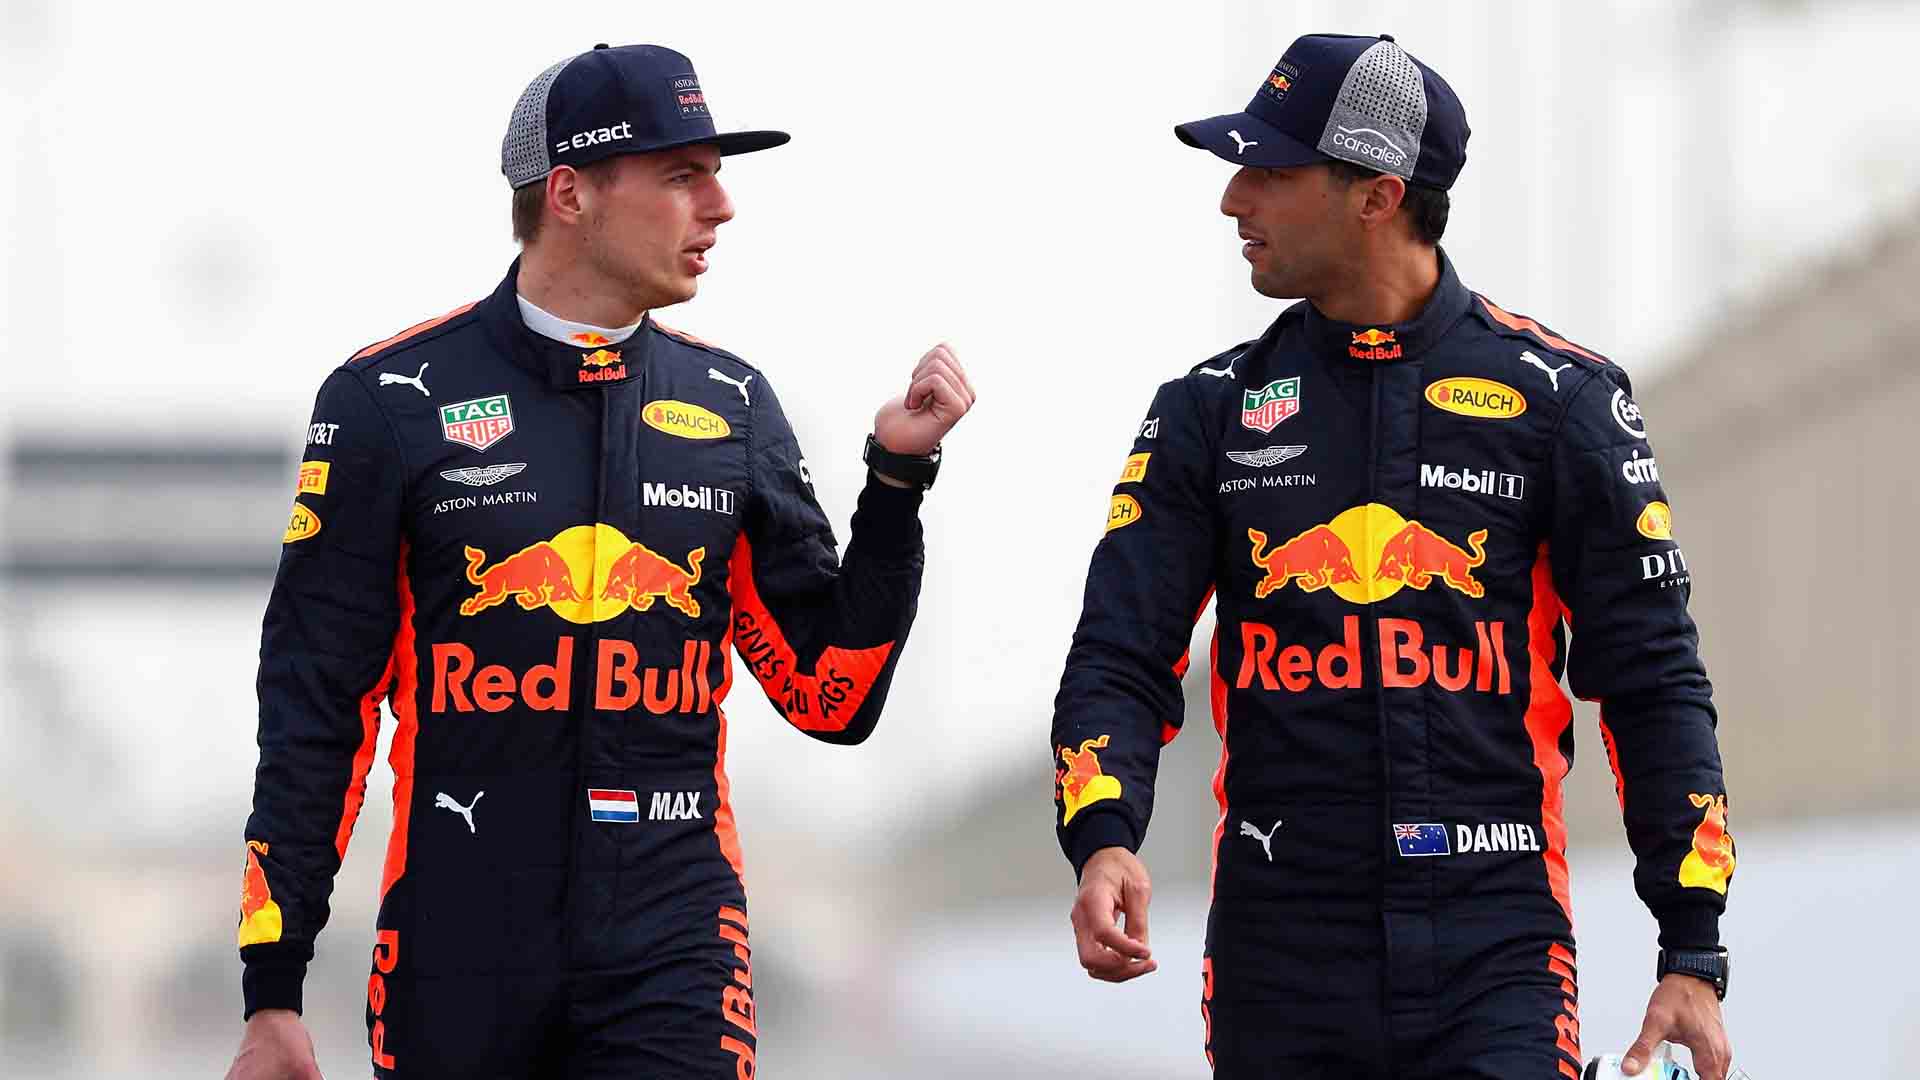 Verstappen and Ricciardo not reunited after all? [Updated] - Pledge Times